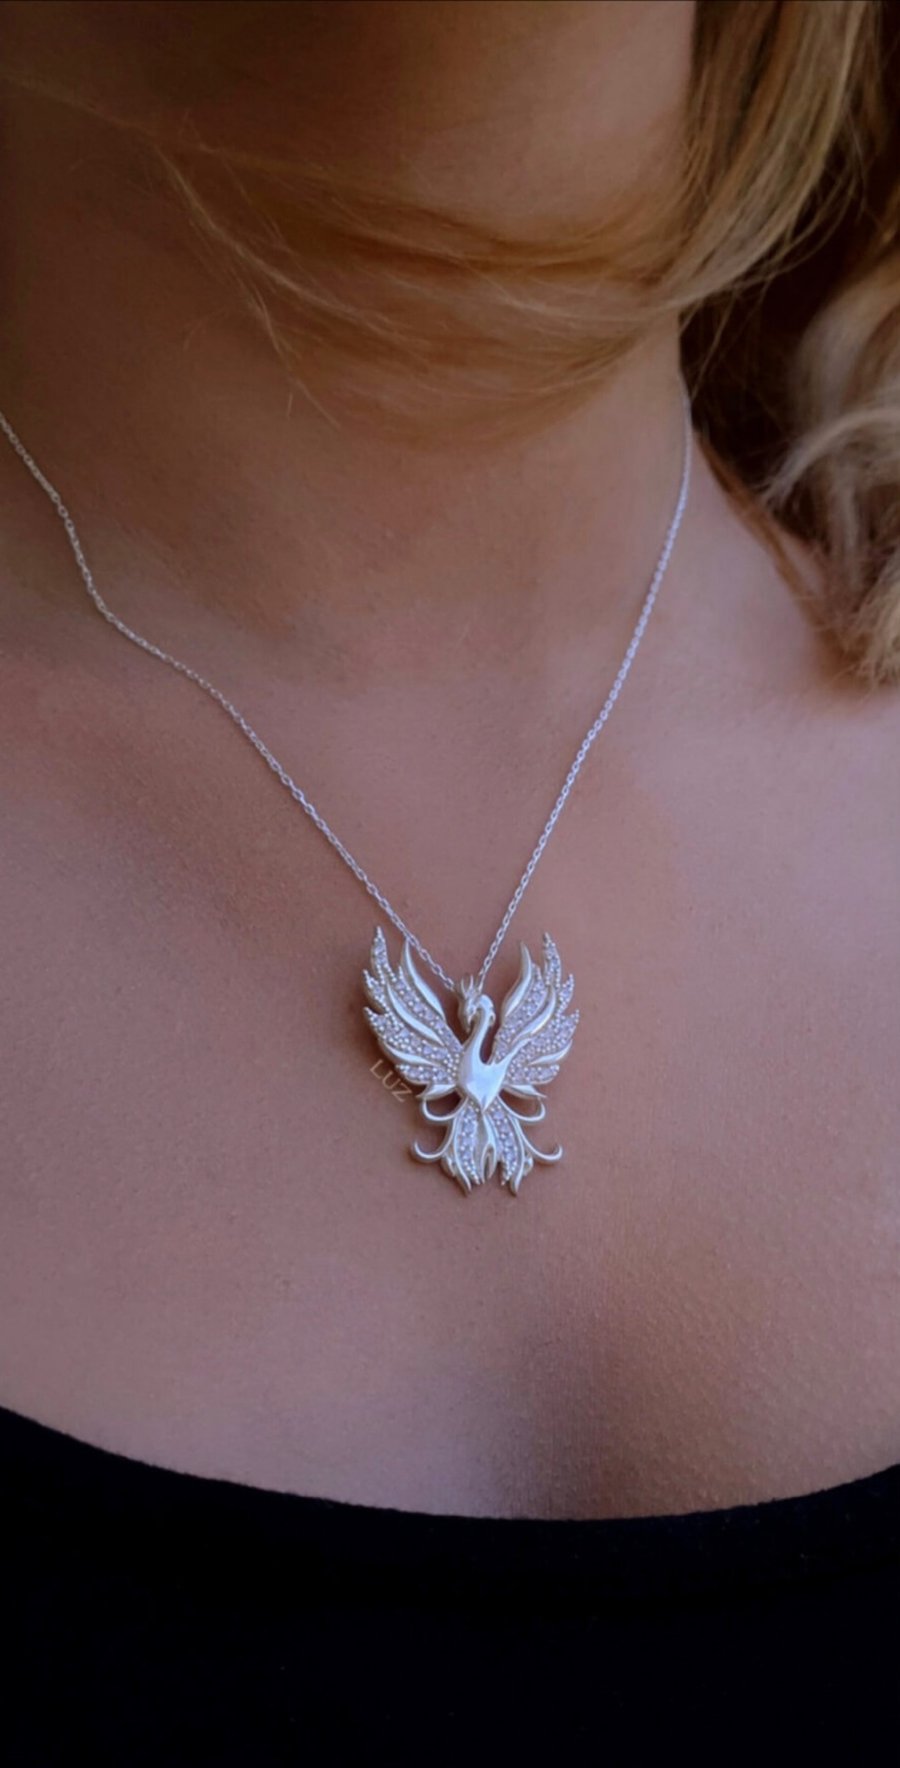 Beautifully designed and created 925 sterling silver Phoenix pendant necklace 